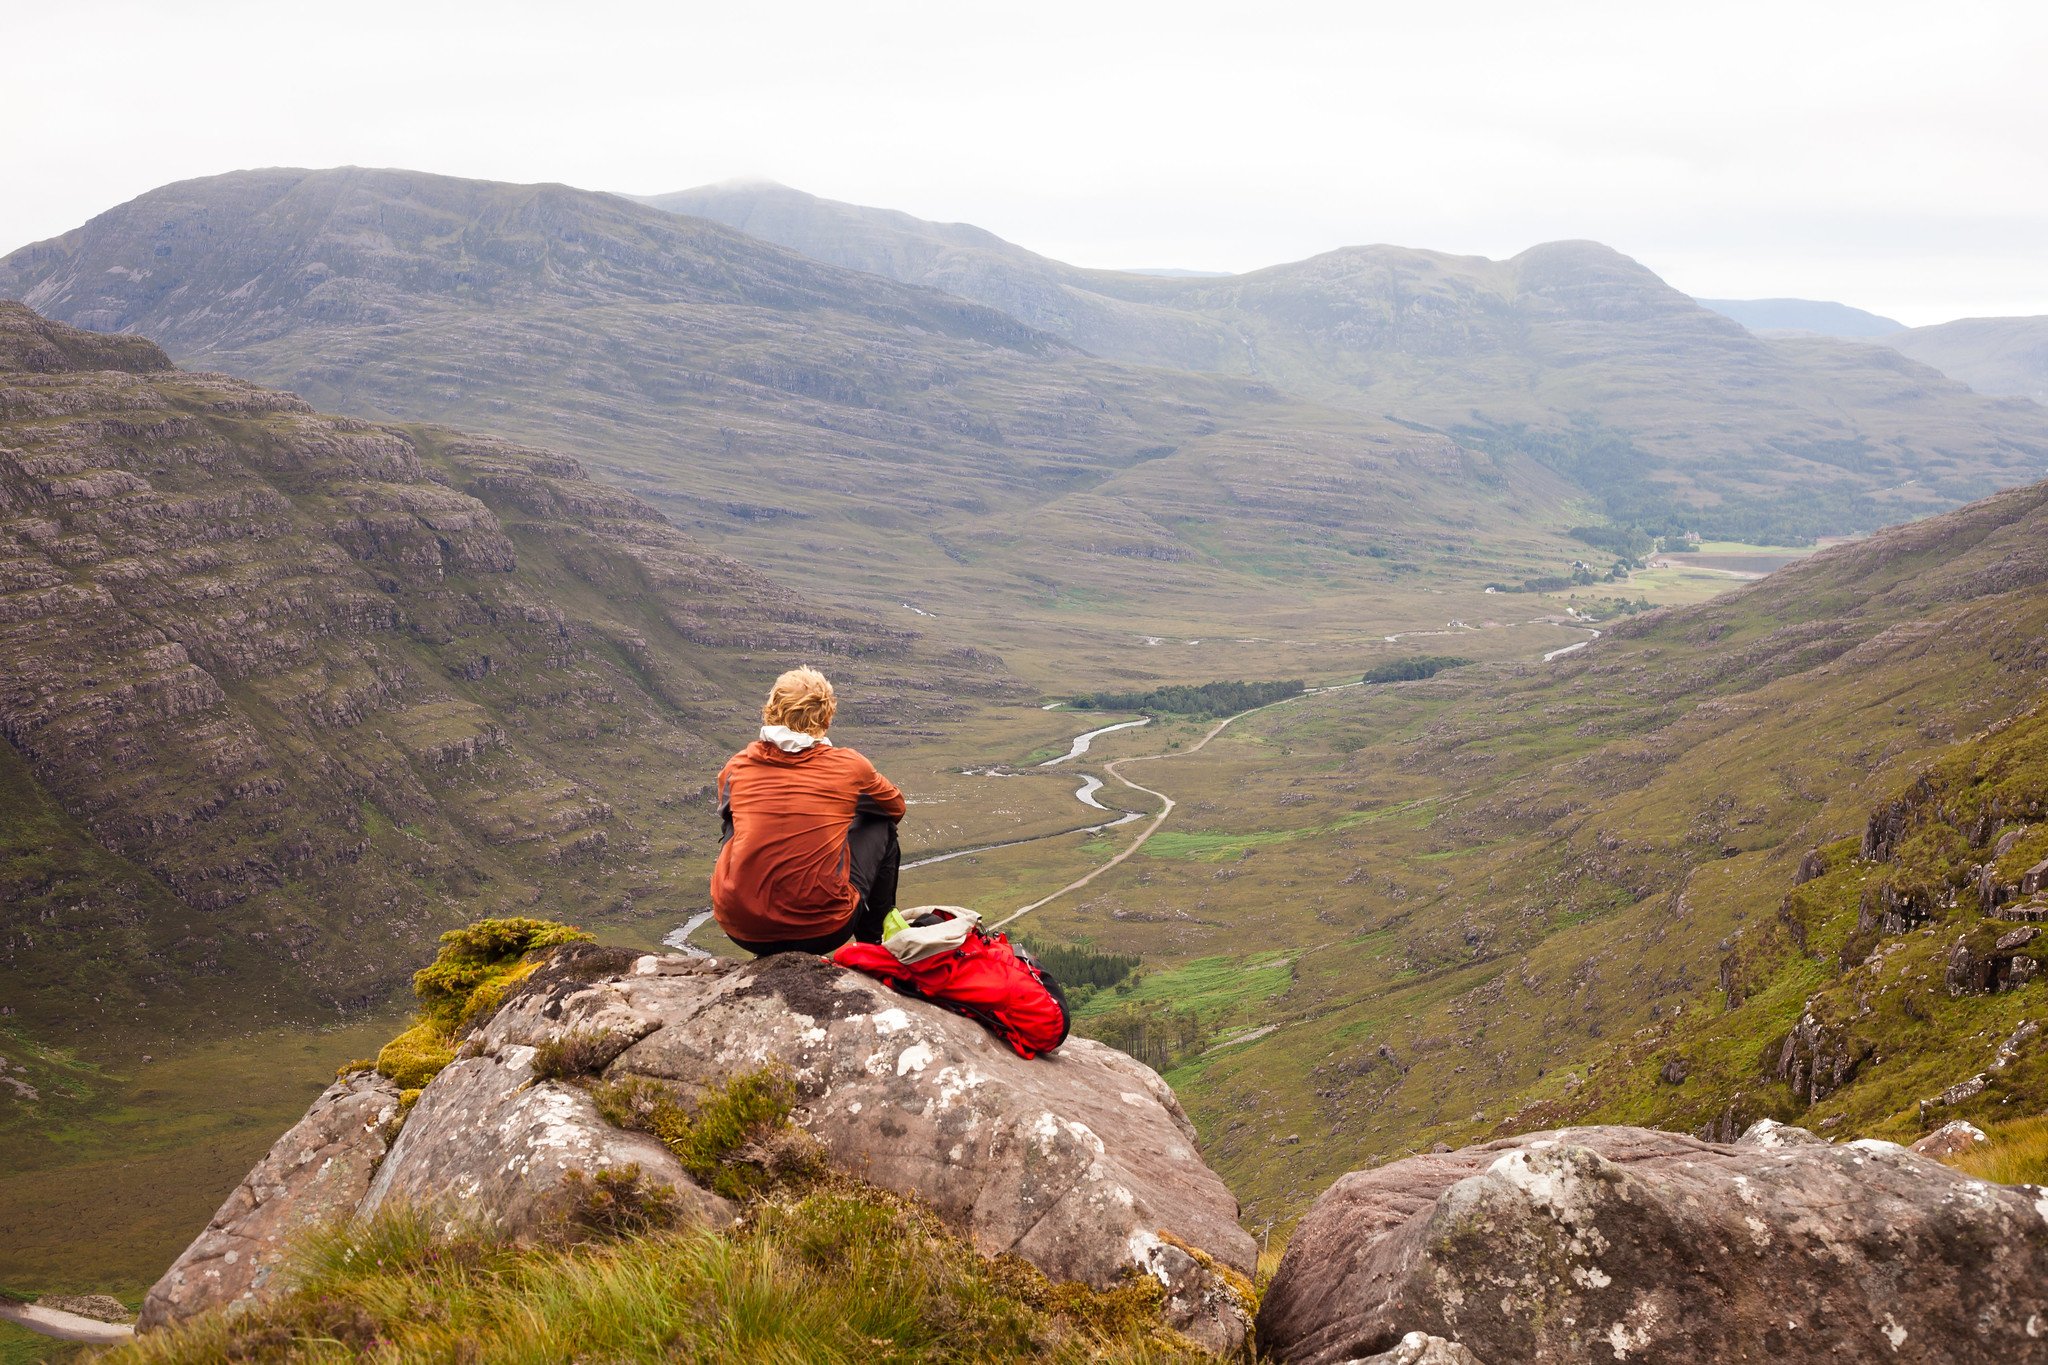 A hiker looks out at the mountain view in the Scottish Highlands.